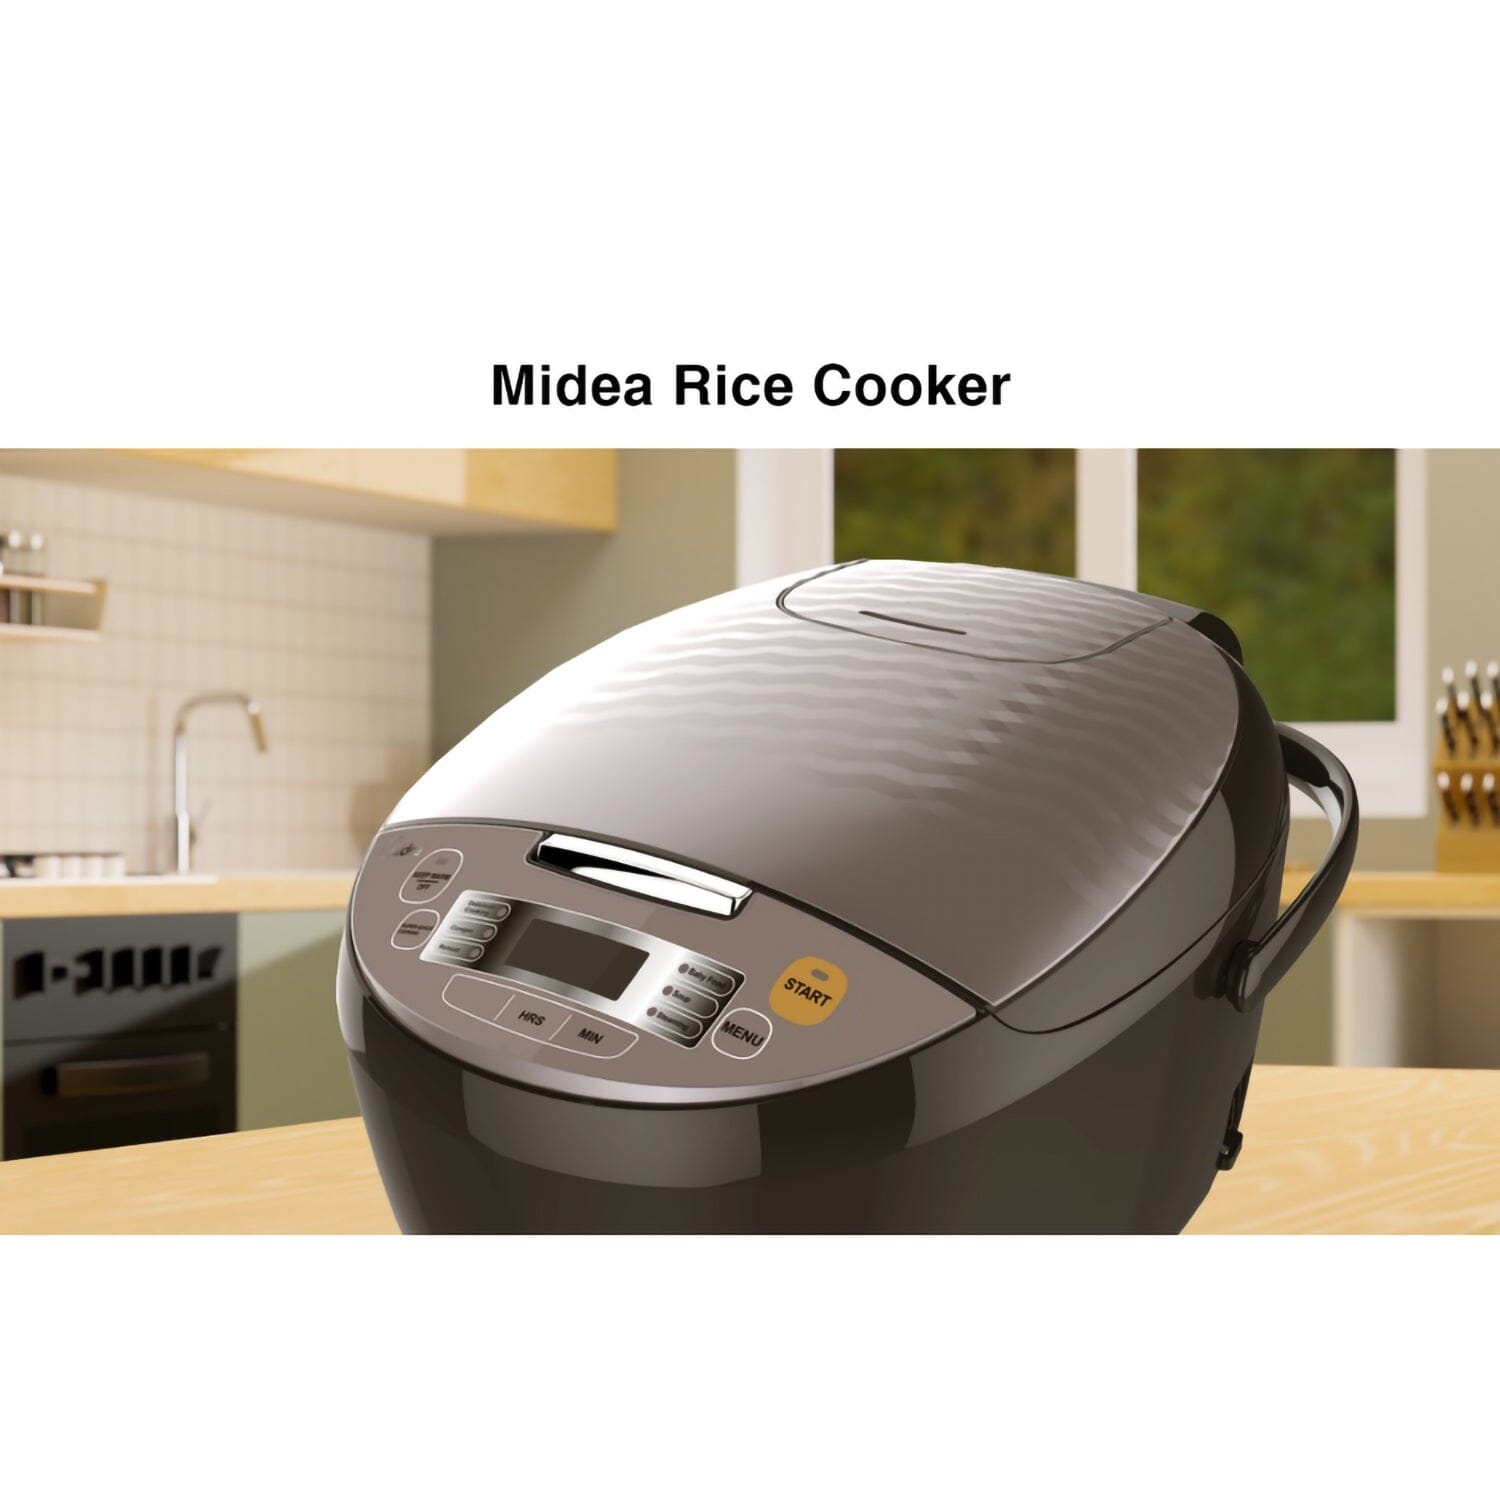 https://cdn.shopify.com/s/files/1/0113/9733/3049/products/midea-18l-automatic-keep-warm-function-rice-cooker-blackmmr5018-midea-538997.jpg?v=1672843254&width=1500